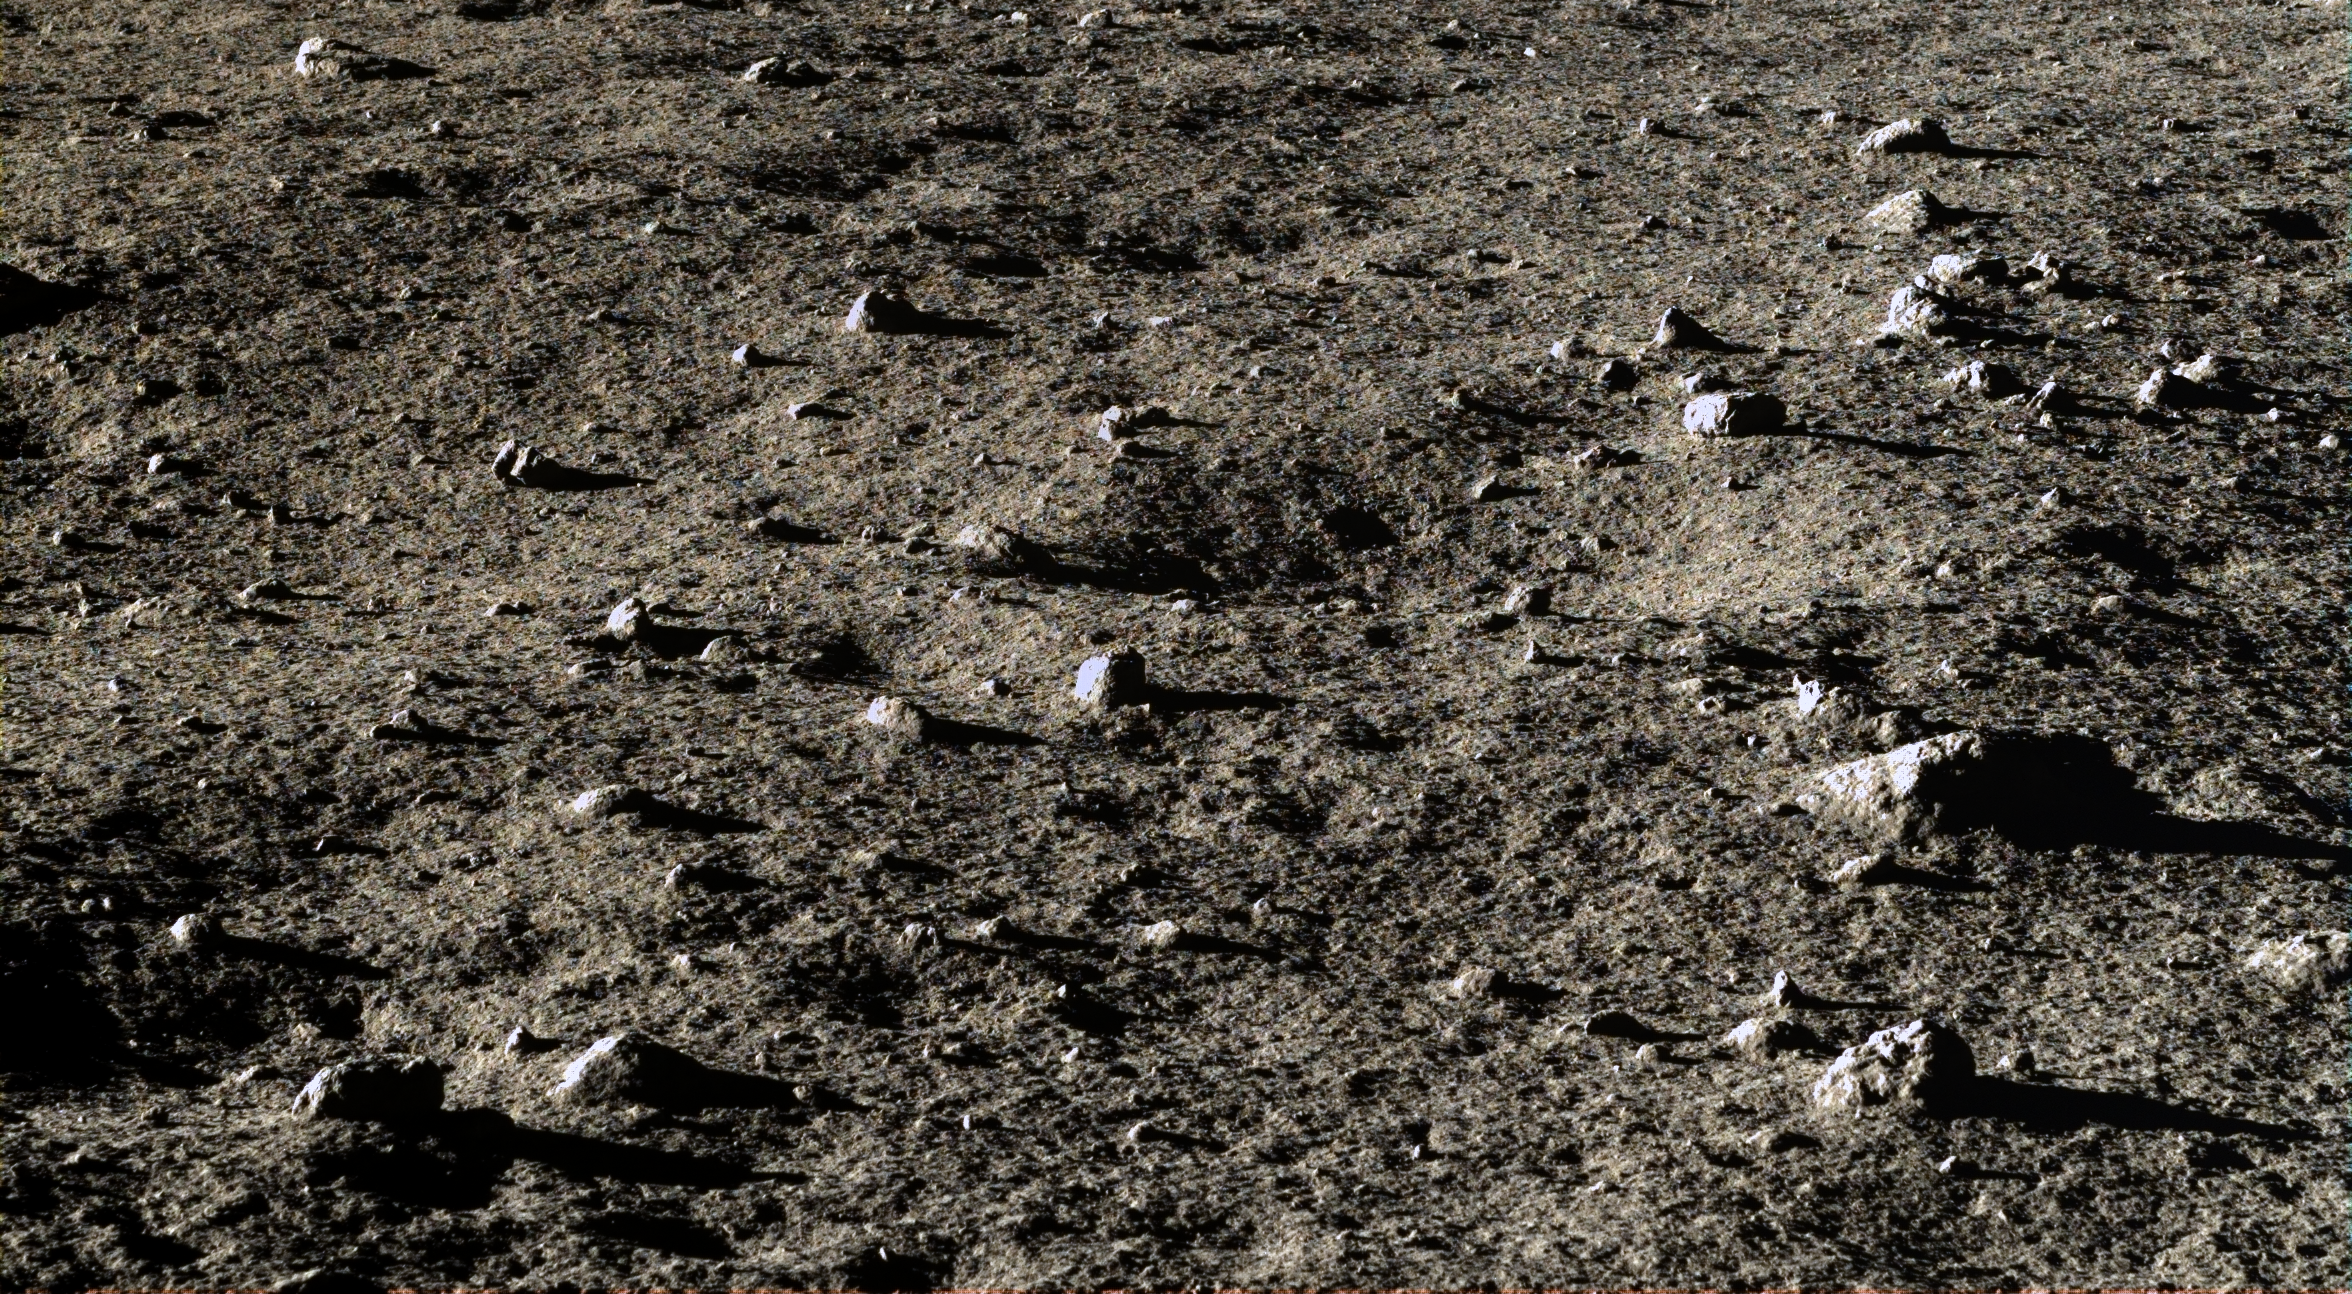 These Are The First Photos Taken From The Surface Of The Moon In 37 Years